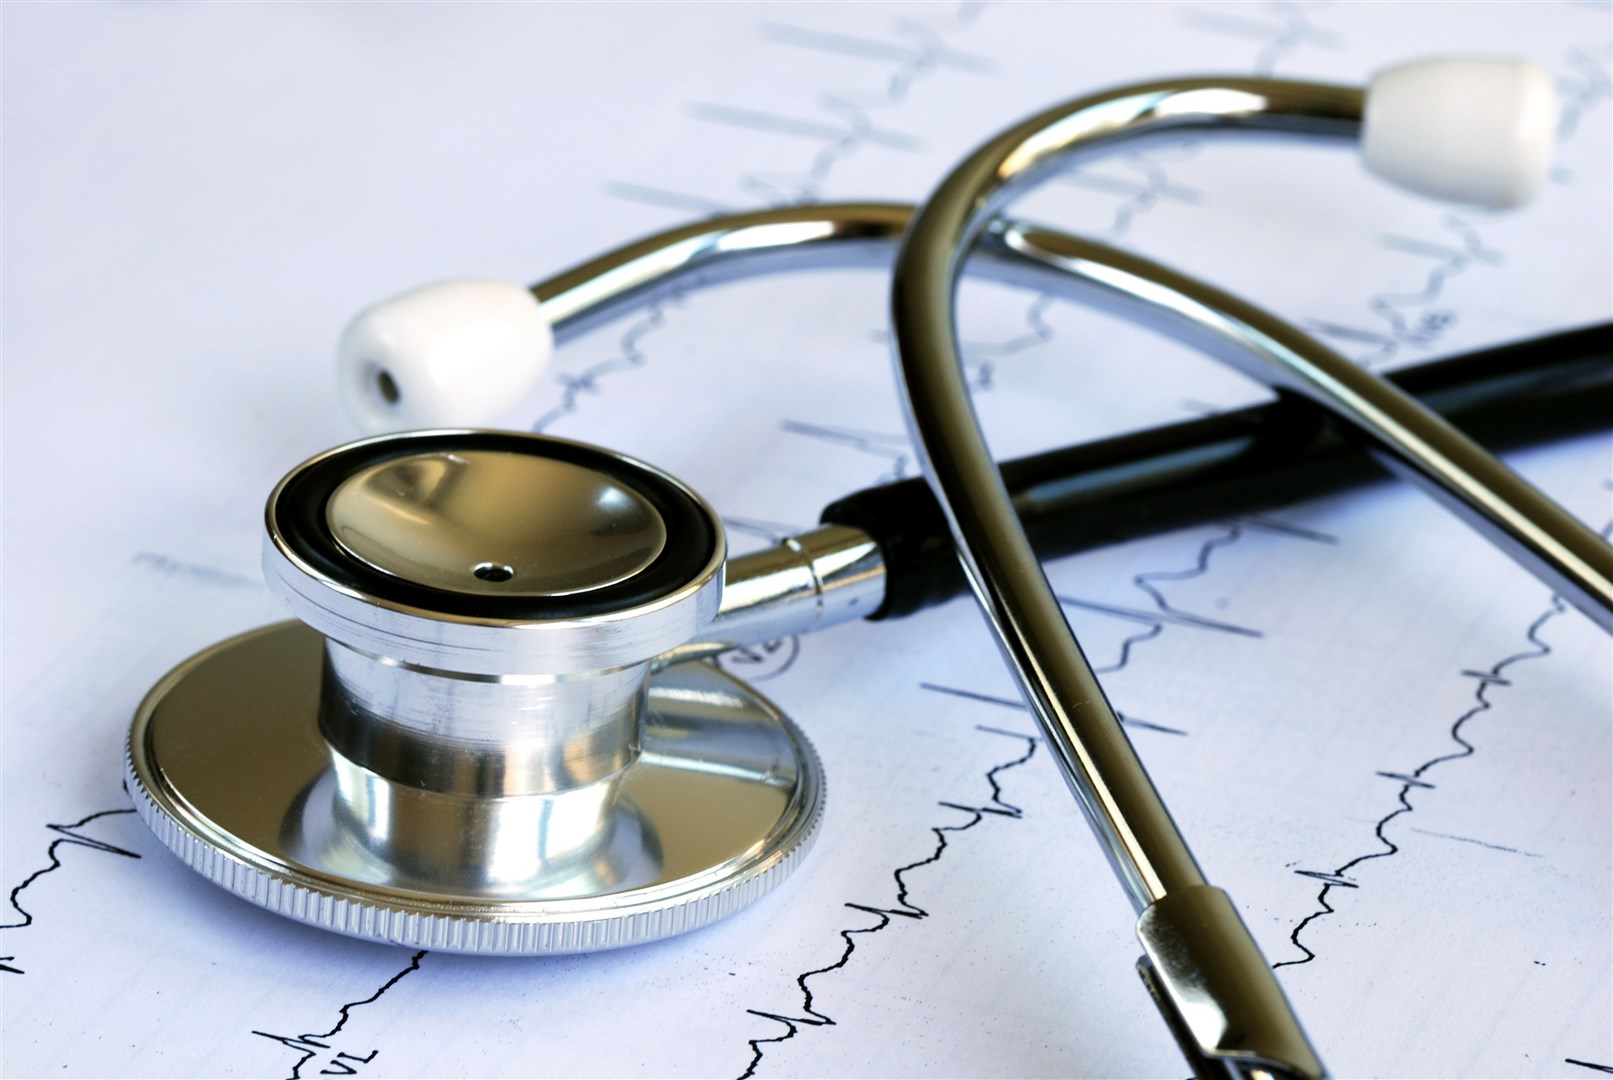 Most people are happy with GP services in the region, according to a new survey.